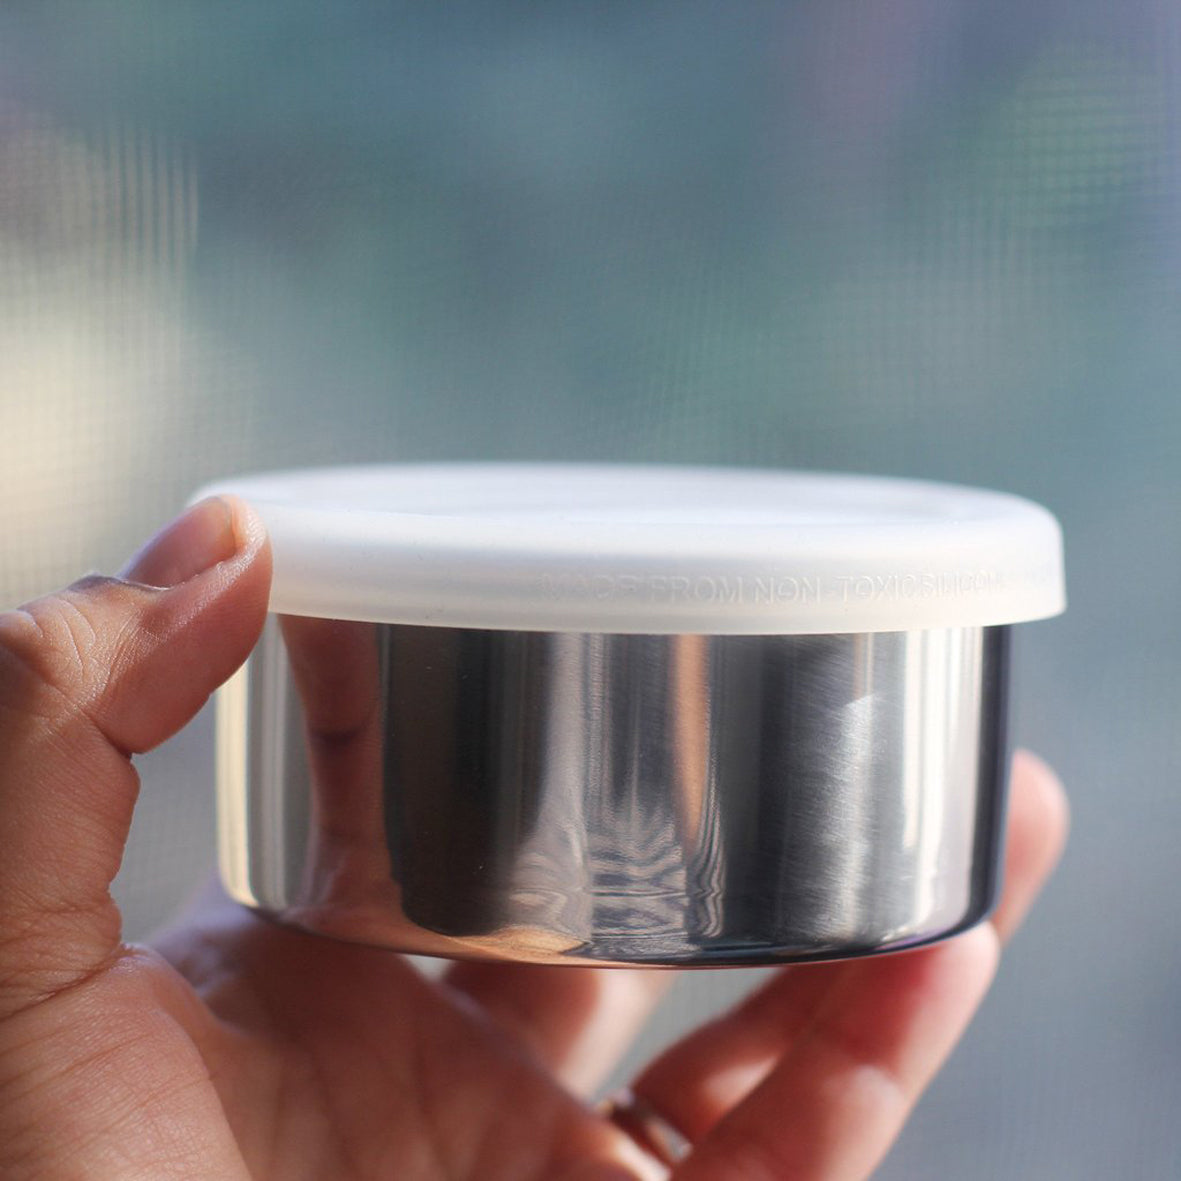 Ecolunchbox snack cup